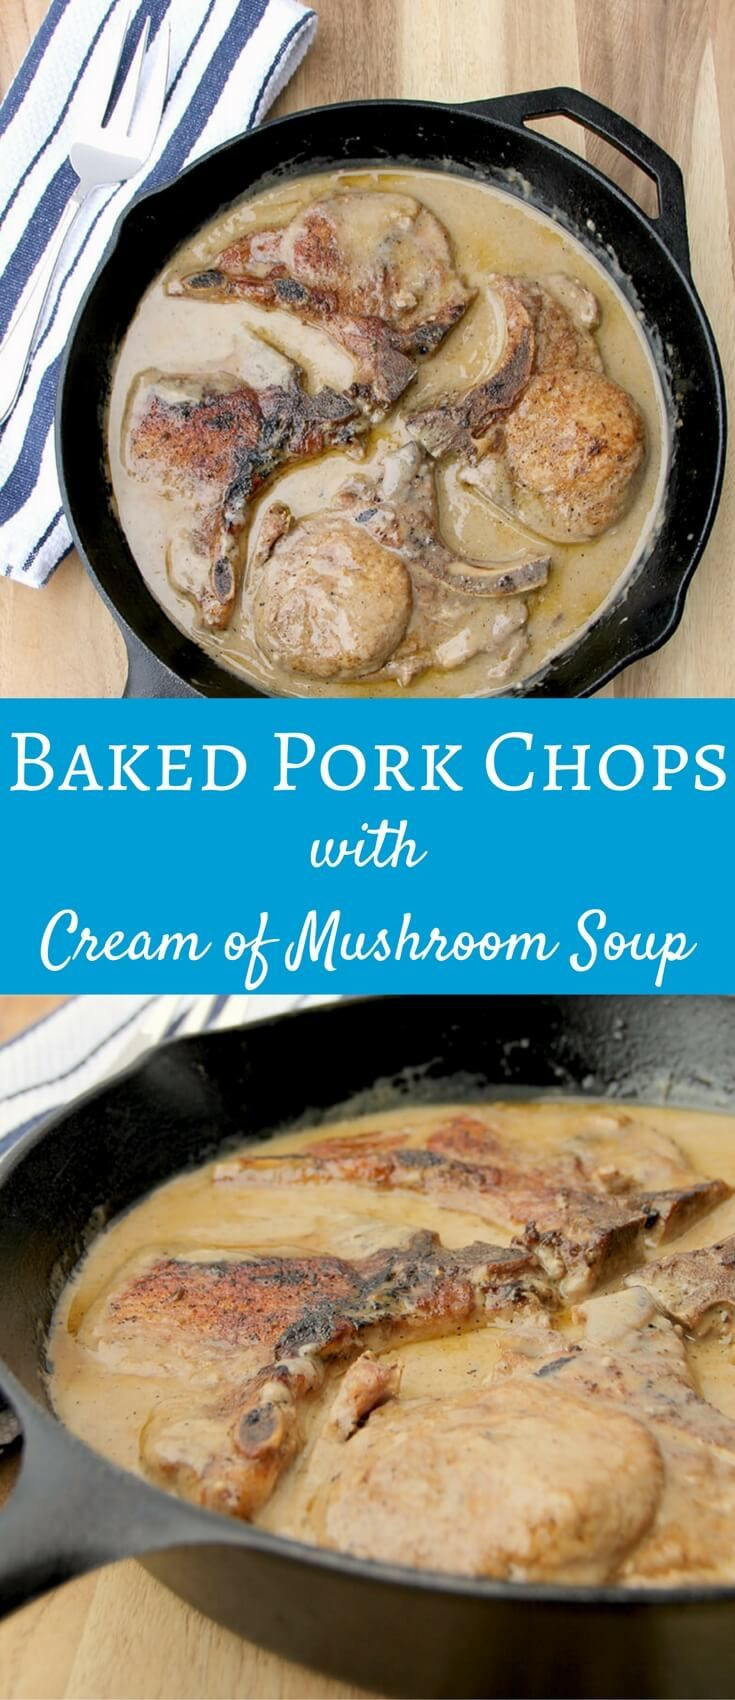 Baked Boneless Pork Chops With Cream Of Mushroom Soup
 Easy baked pork chops with cream of mushroom soup help you